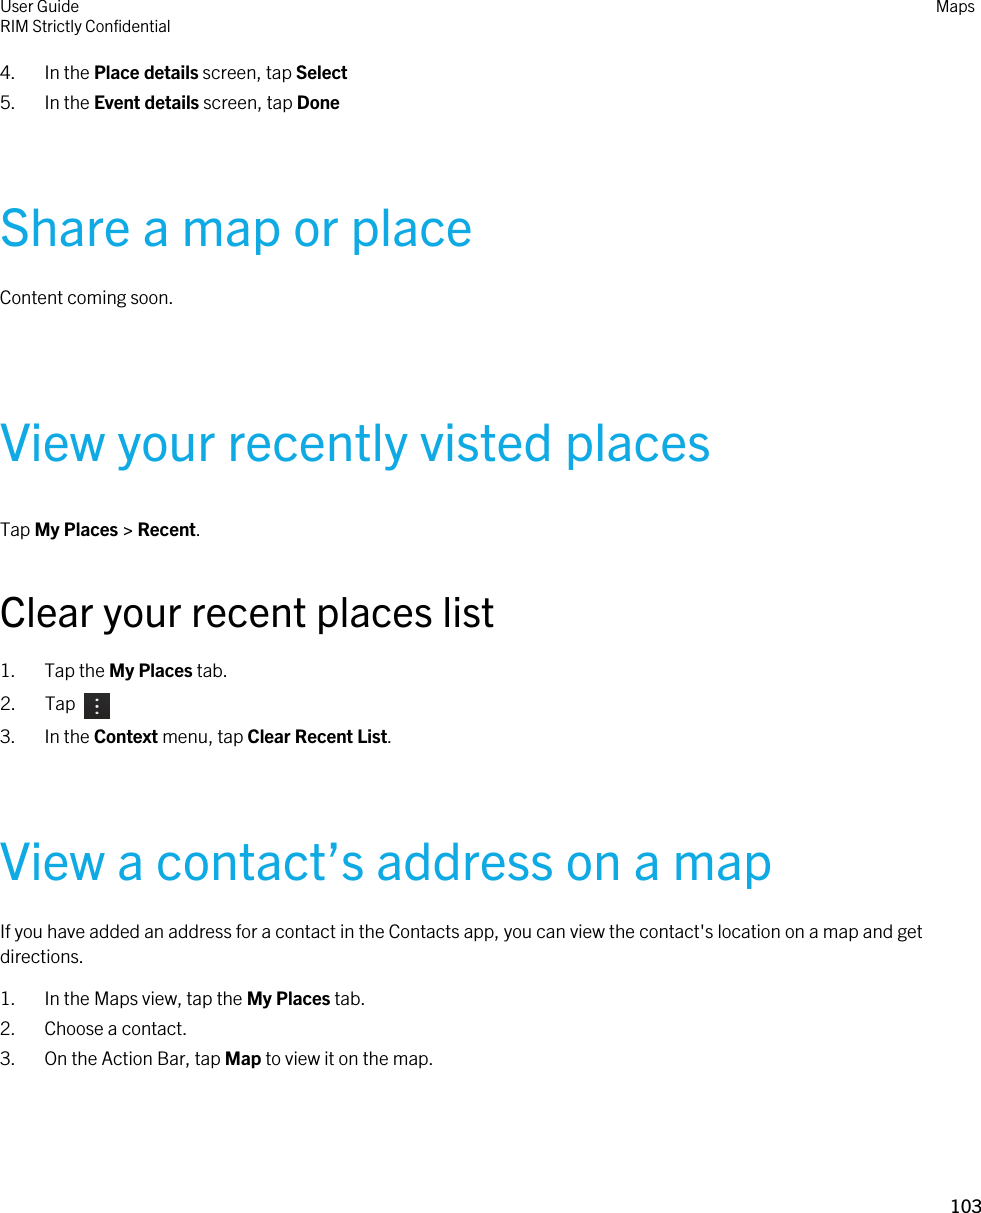 4. In the Place details screen, tap Select5. In the Event details screen, tap DoneShare a map or placeContent coming soon.View your recently visted placesTap My Places &gt; Recent.Clear your recent places list1. Tap the My Places tab.2.  Tap 3. In the Context menu, tap Clear Recent List.View a contact’s address on a mapIf you have added an address for a contact in the Contacts app, you can view the contact&apos;s location on a map and get directions.1. In the Maps view, tap the My Places tab.2. Choose a contact.3. On the Action Bar, tap Map to view it on the map.User GuideRIM Strictly Confidential Maps103 